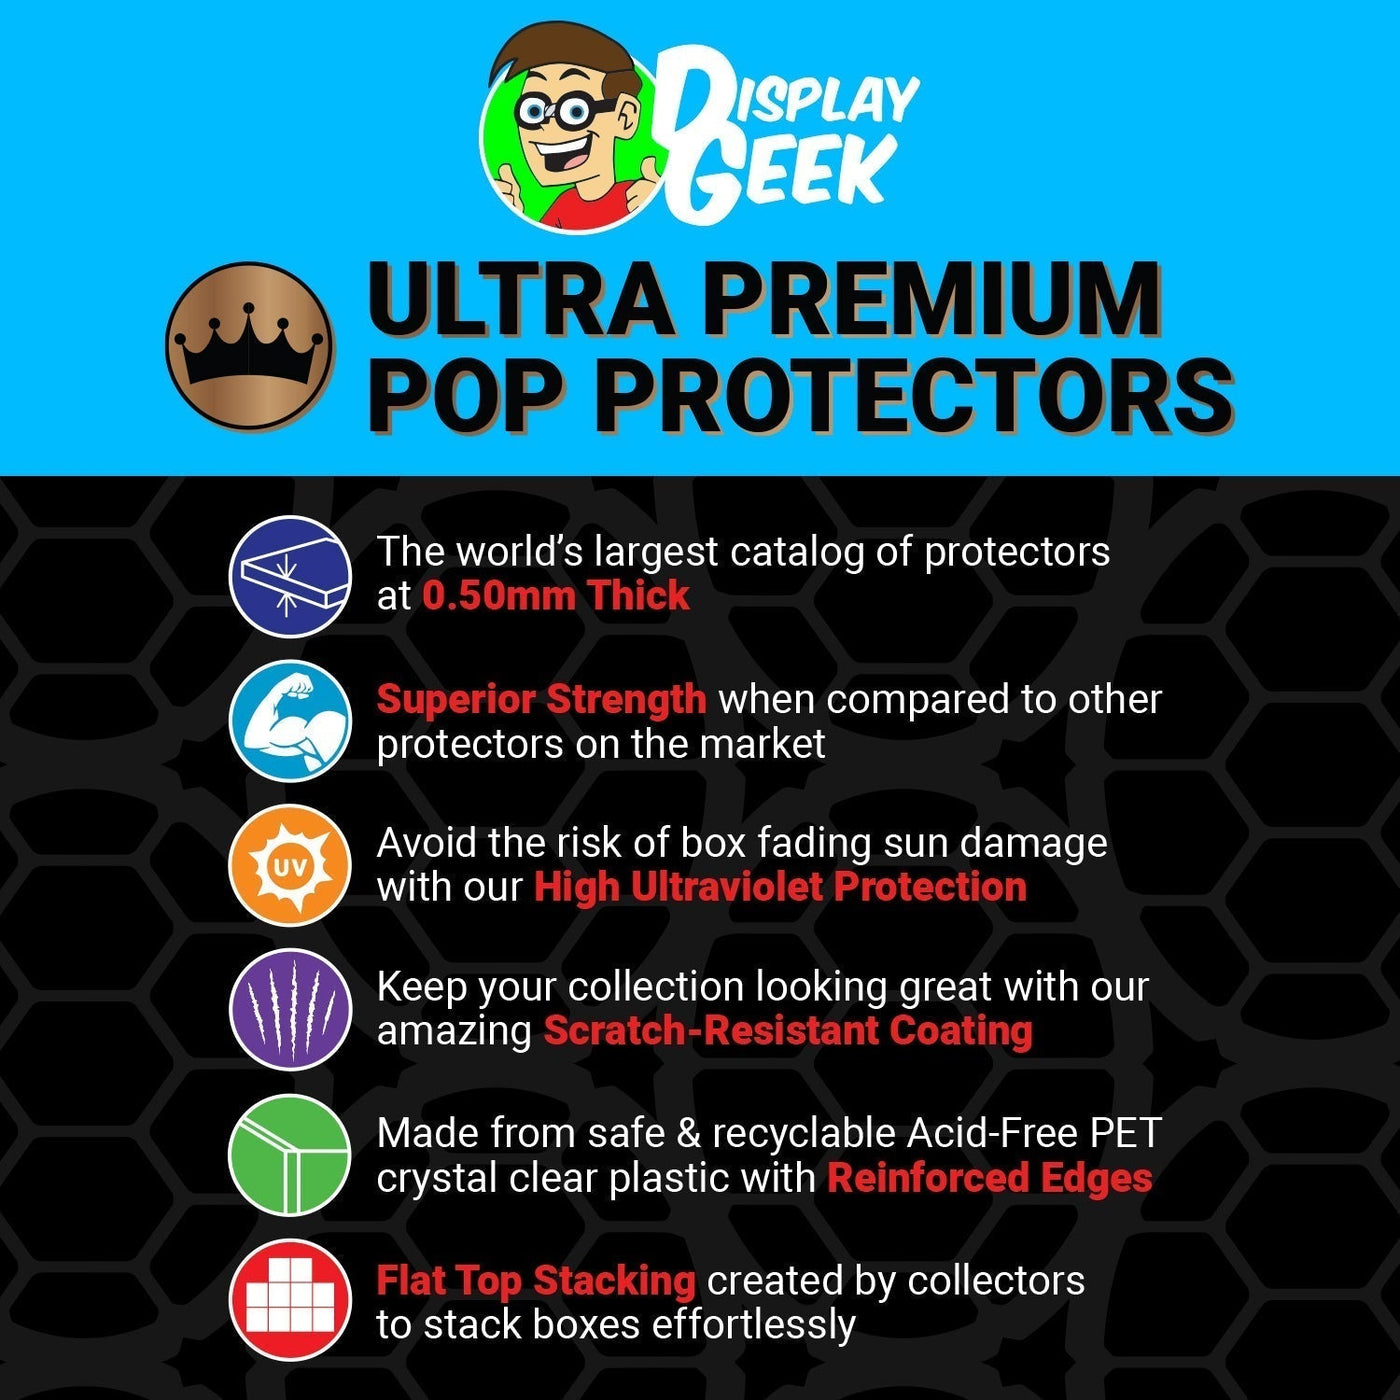 Pop Protector for 6 inch Giant Lady Pink #99 Super Funko Pop on The Protector Guide App by Display Geek